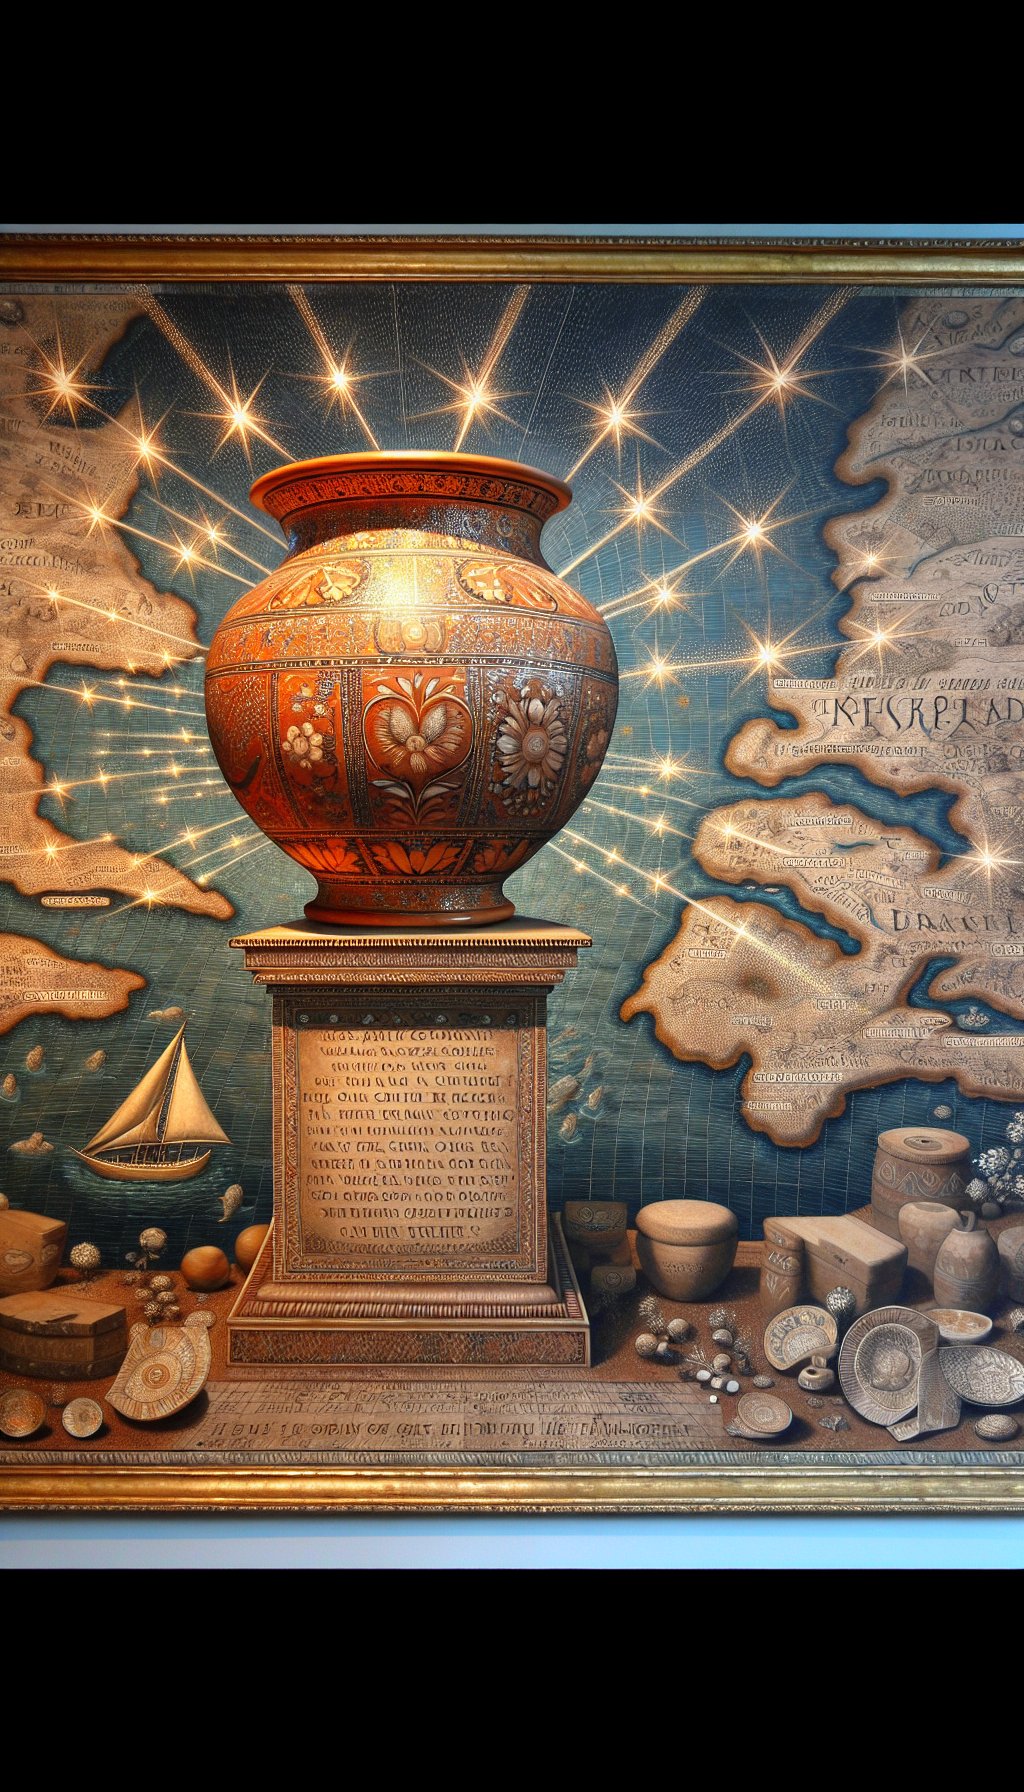 An intricately drawn treasure map unfurls across the page, leading to a majestic 5-gallon crock, sparkling amidst other common pottery. The crock, embellished with rare patterns and an aura of luminance, sits atop a pedestal with a tag showcasing a hefty value. Diverse art styles like pointillism, art nouveau, and engravings are interwoven within the map's topology and the crock's depiction.